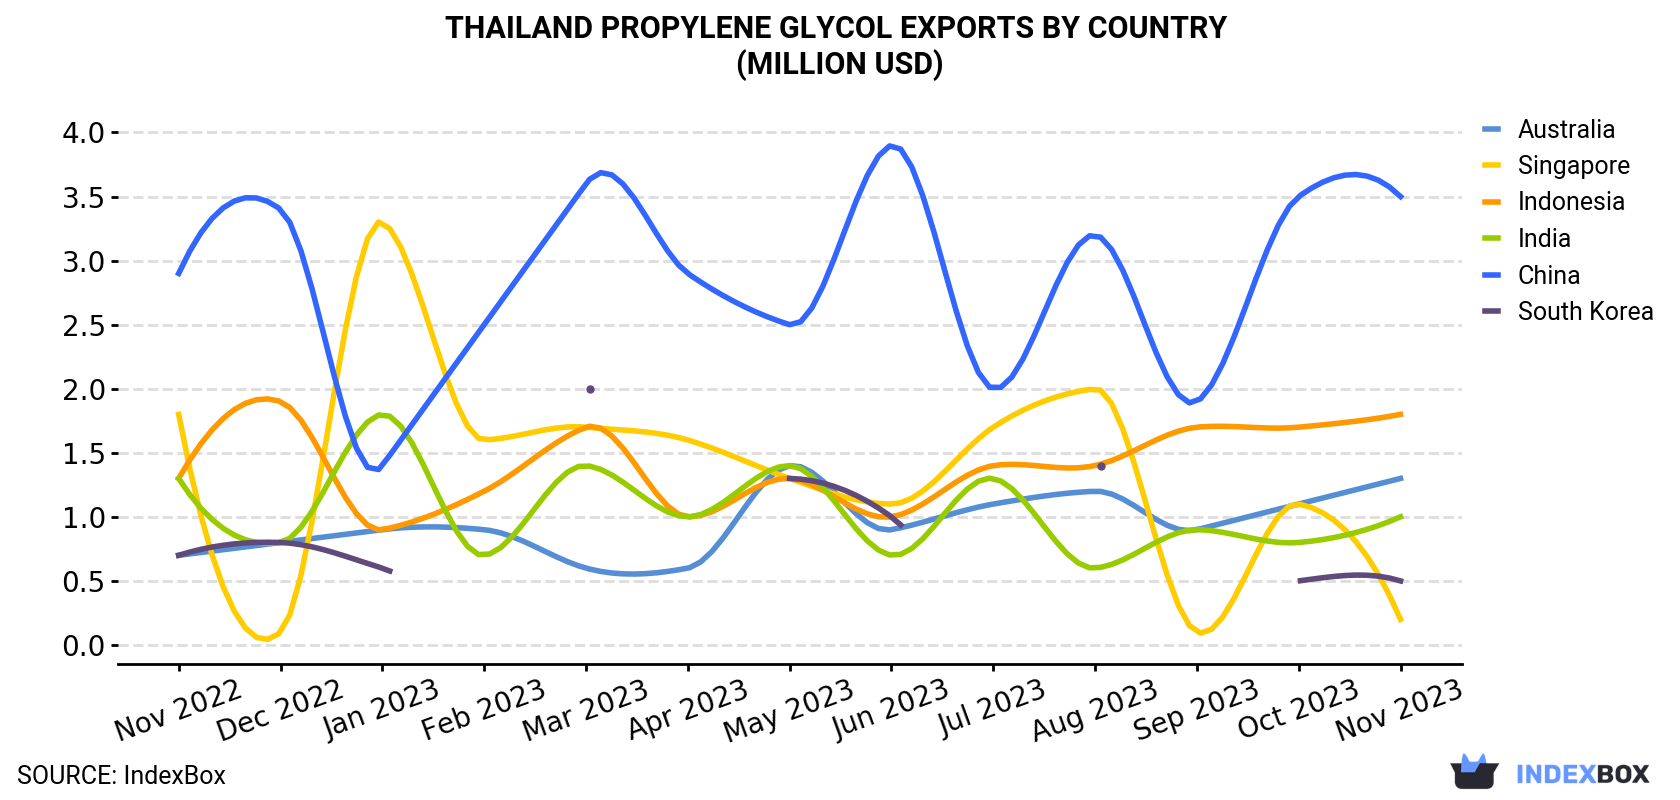 Thailand Propylene Glycol Exports By Country (Million USD)